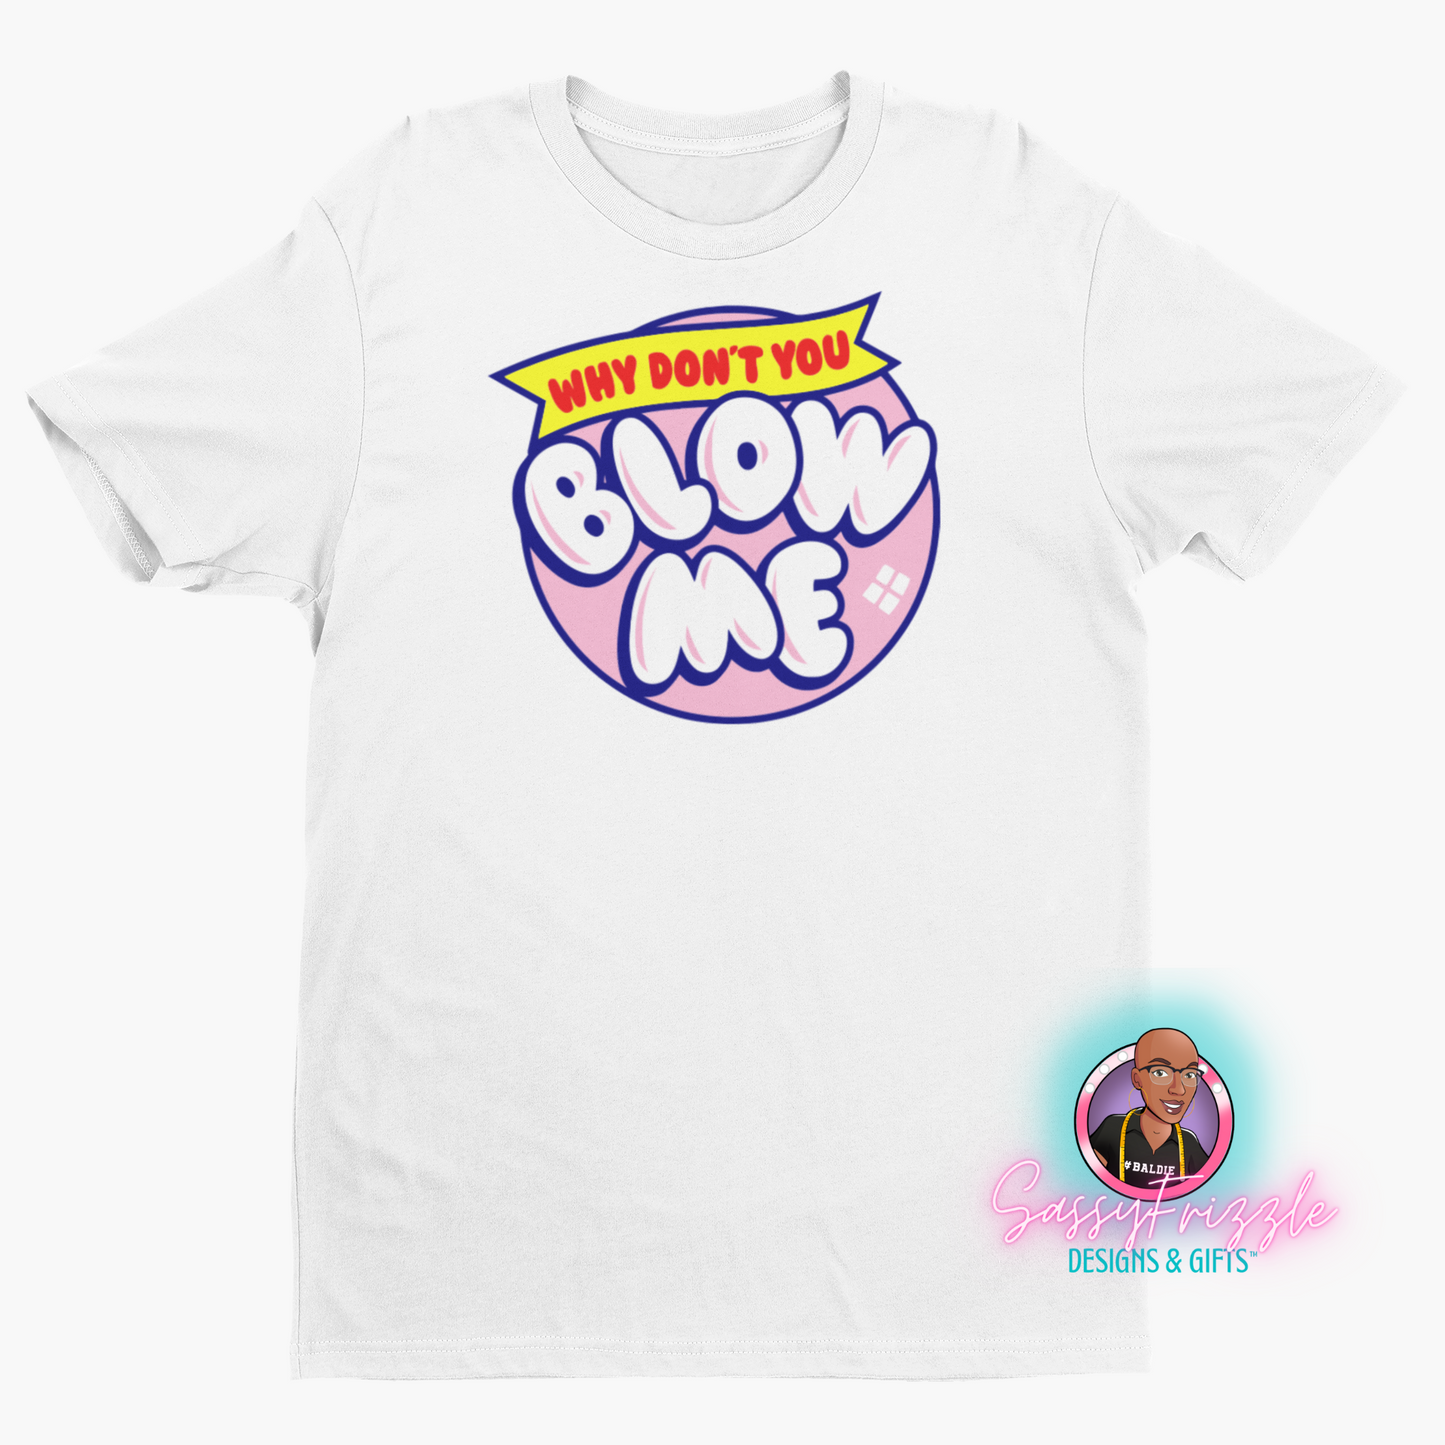 Why Not Blow? Statement Tee